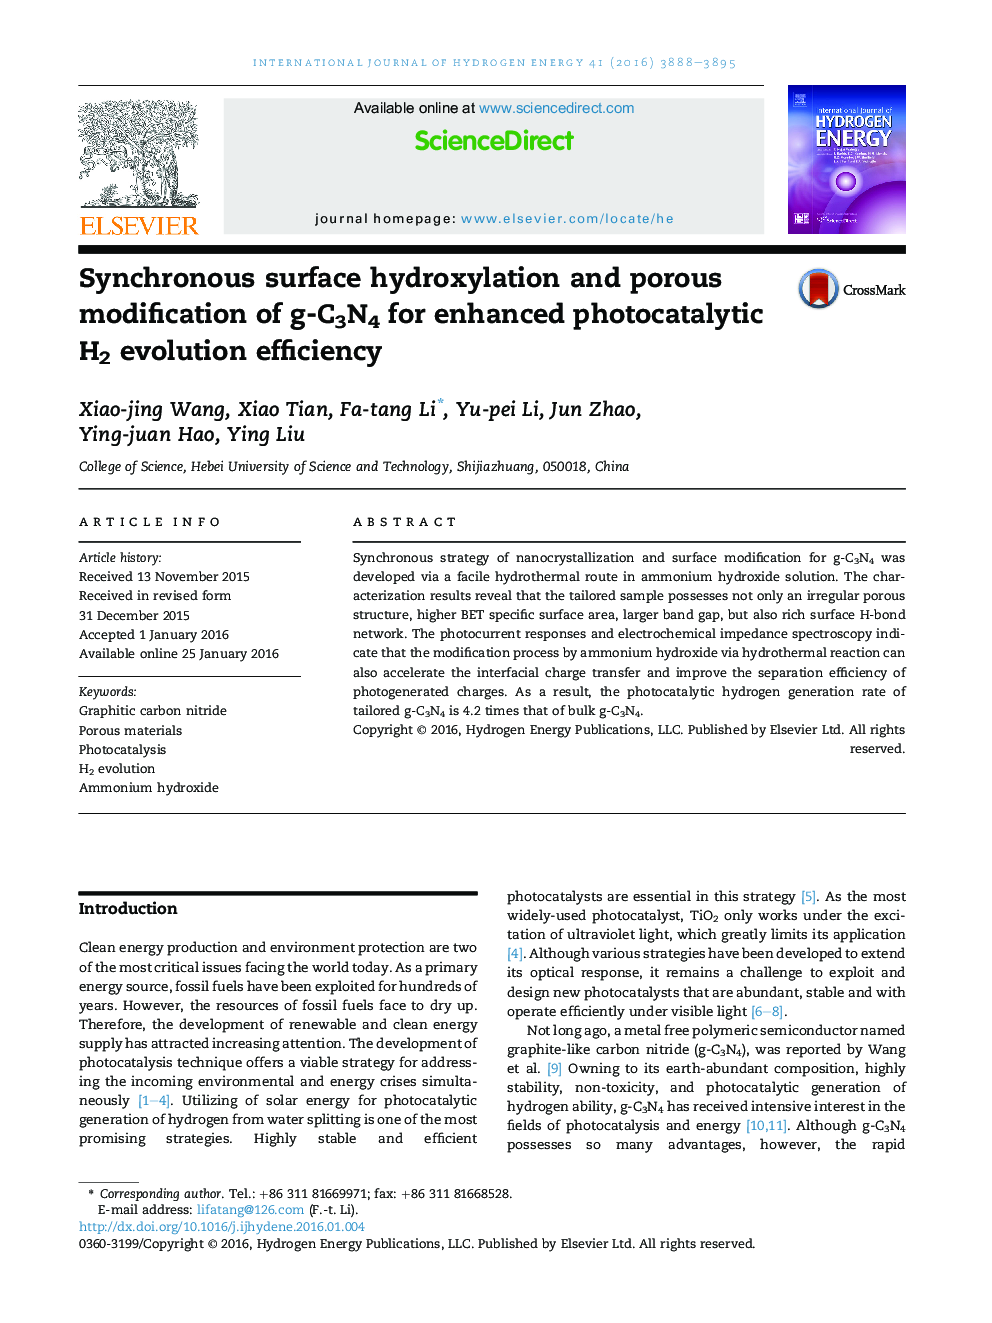 Synchronous surface hydroxylation and porous modification of g-C3N4 for enhanced photocatalytic H2 evolution efficiency